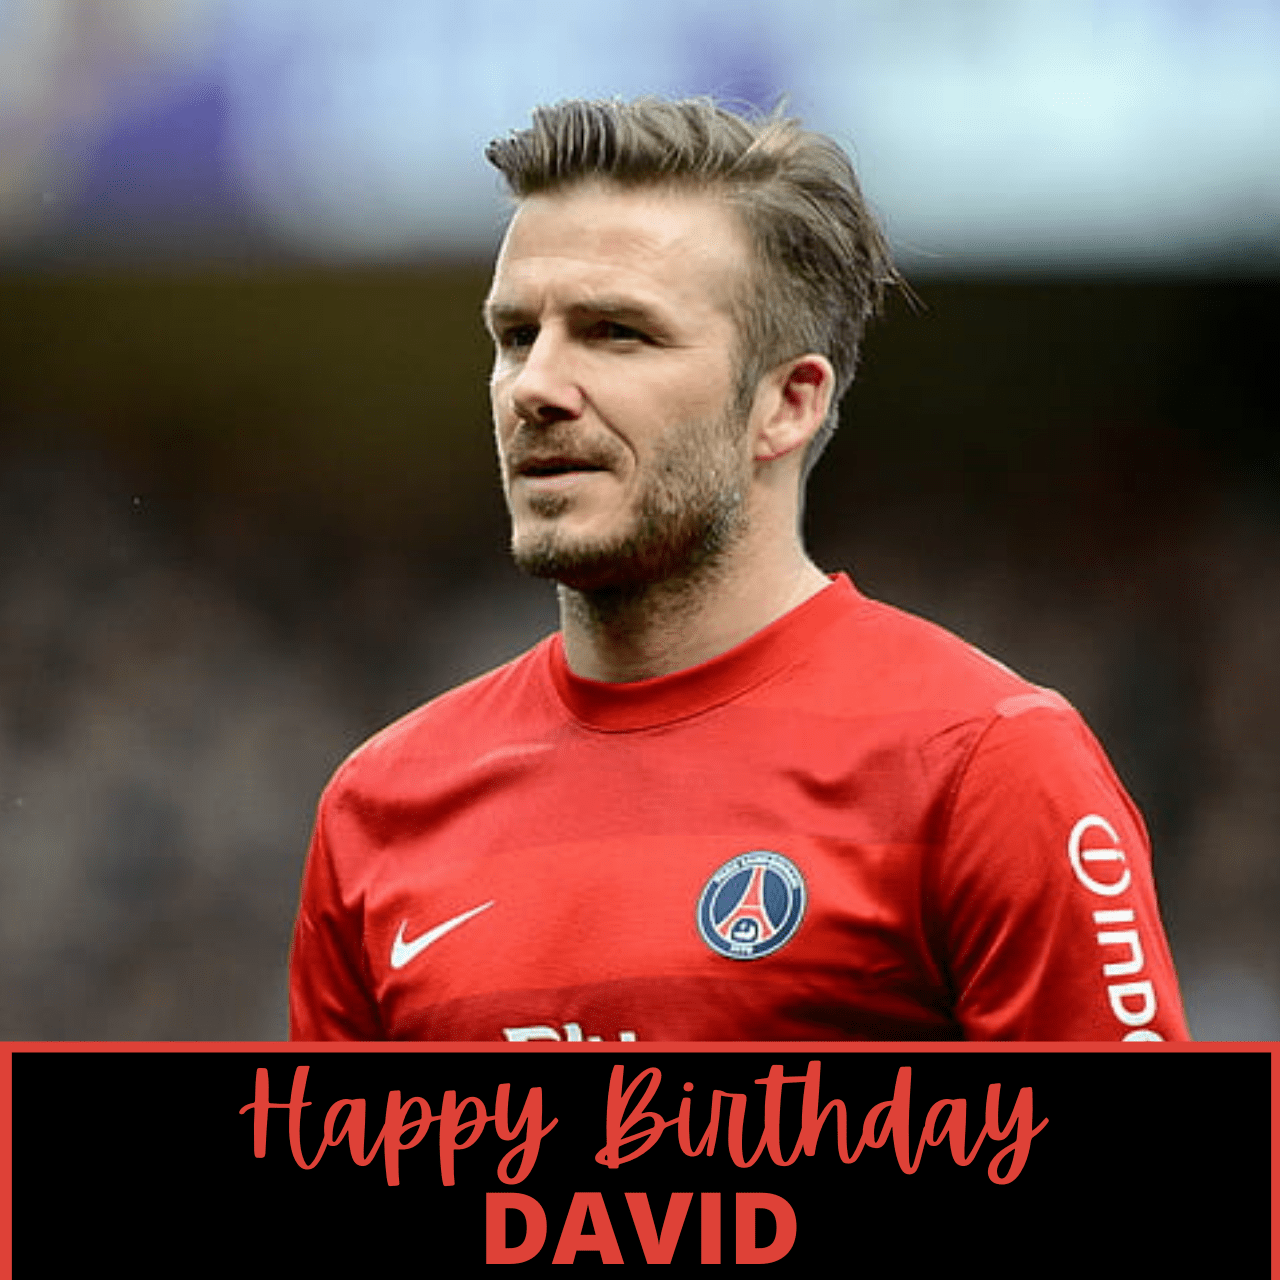 Happy Birthday David Beckham Card, Meme, GIF, Wishes, and Images